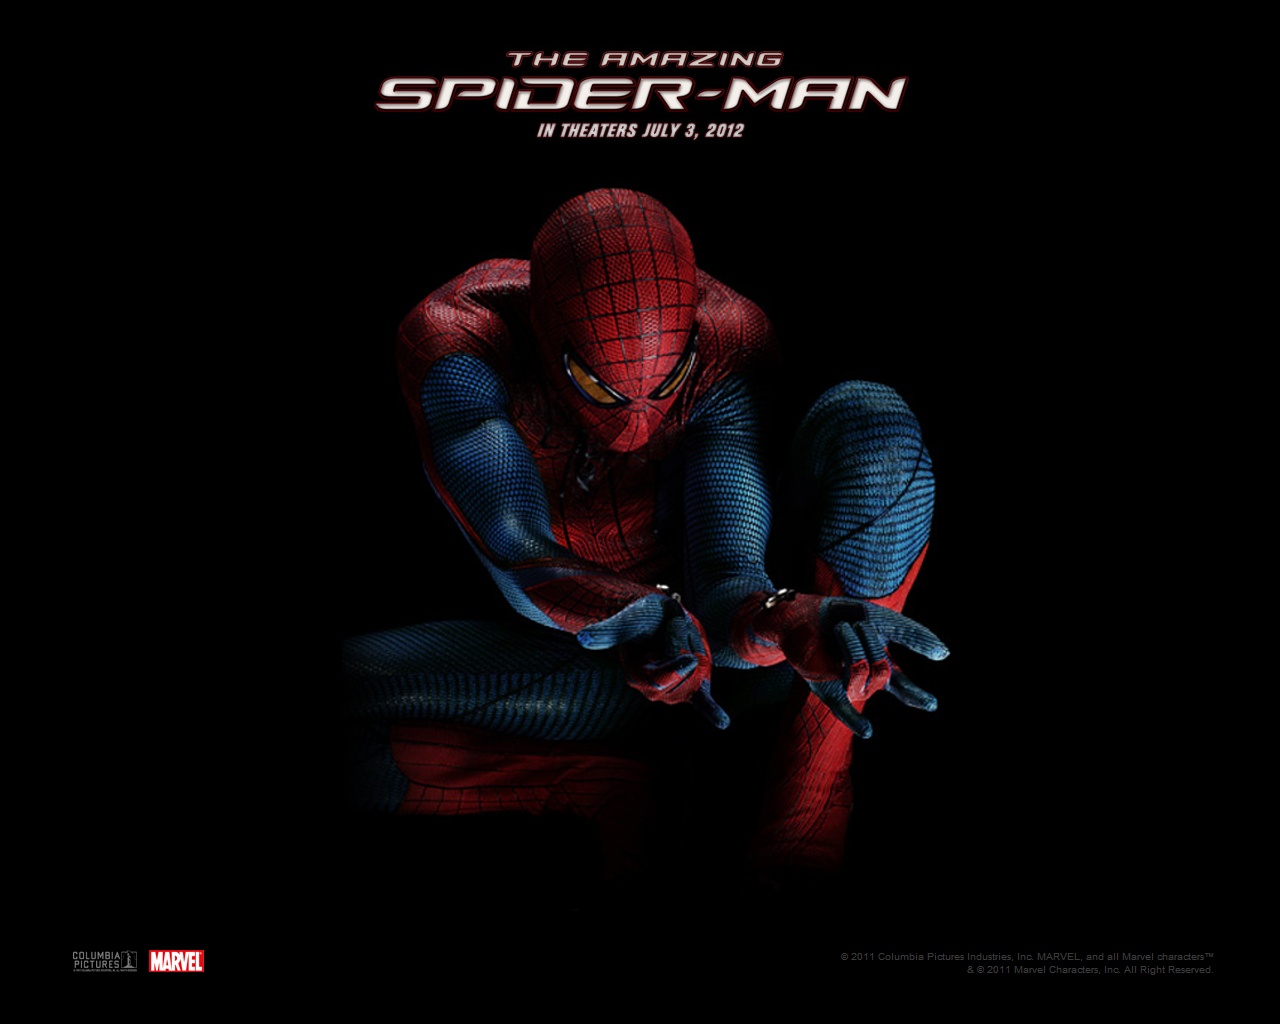  wallpapers Hollywood movies wallpapers The Amazing Spider Man hd